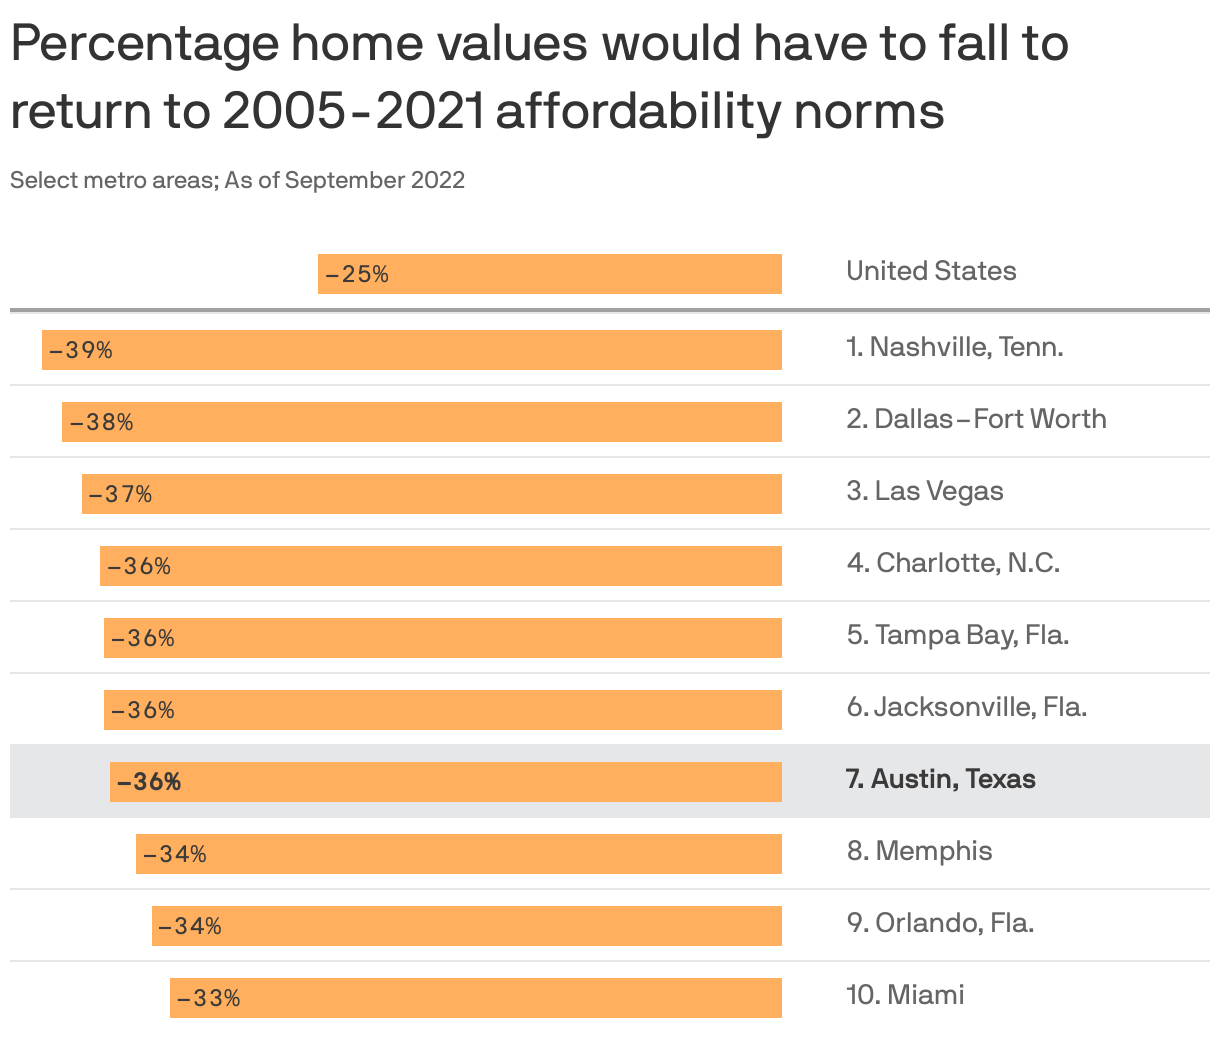 Percentage home values would have to fall to return to 2005-2021 affordability norms